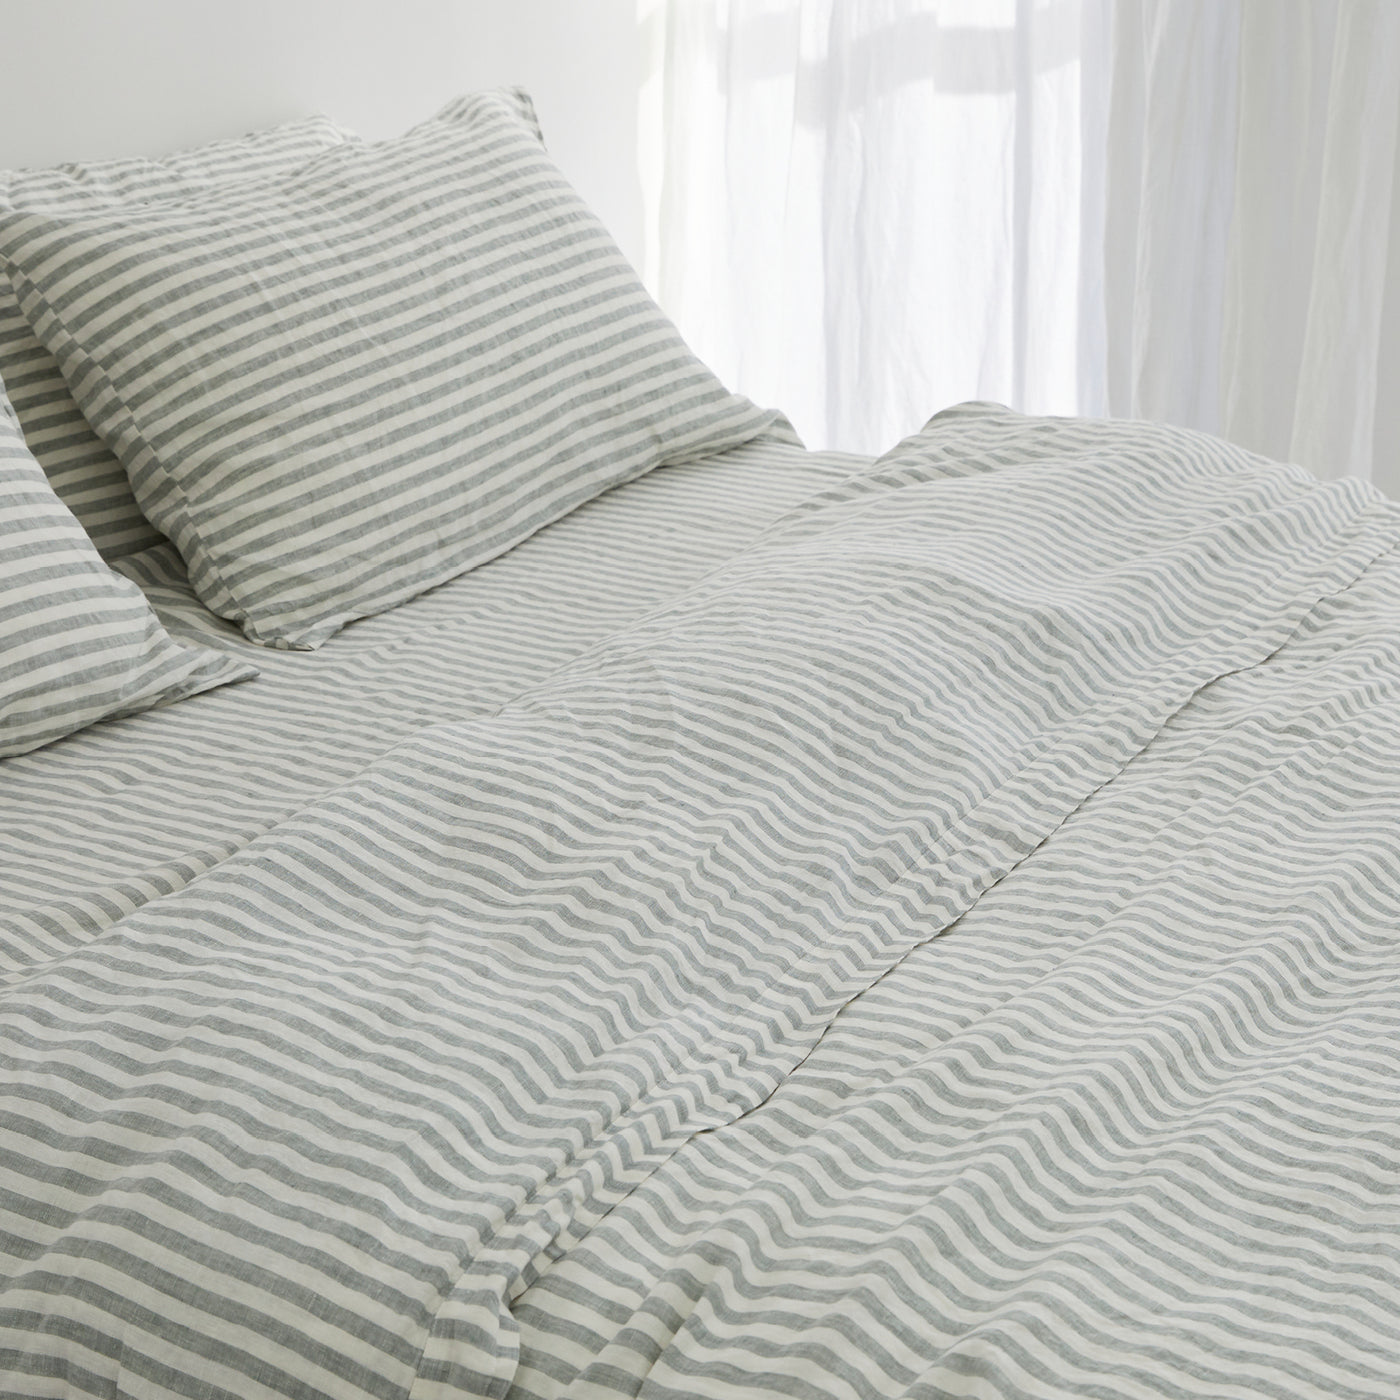 French Flax Linen Quilt Cover Set in Sage Stripe